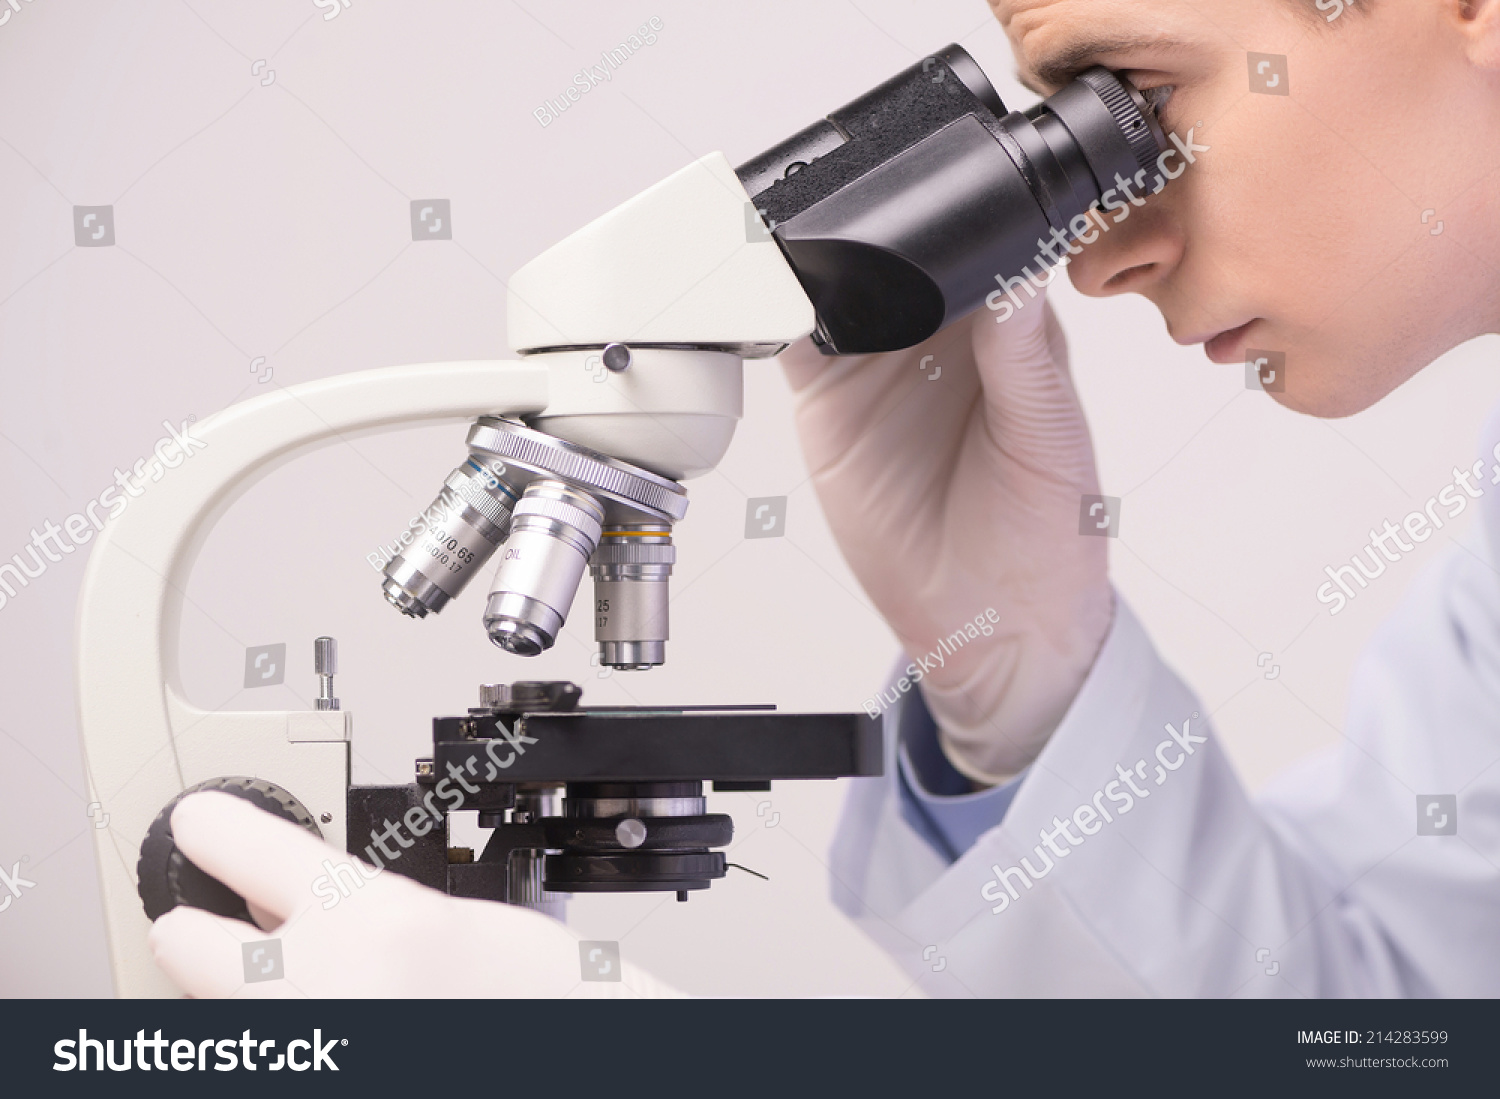 male scientist working in ab with microscope. clinician studying chemical elements in laboratory   #214283599